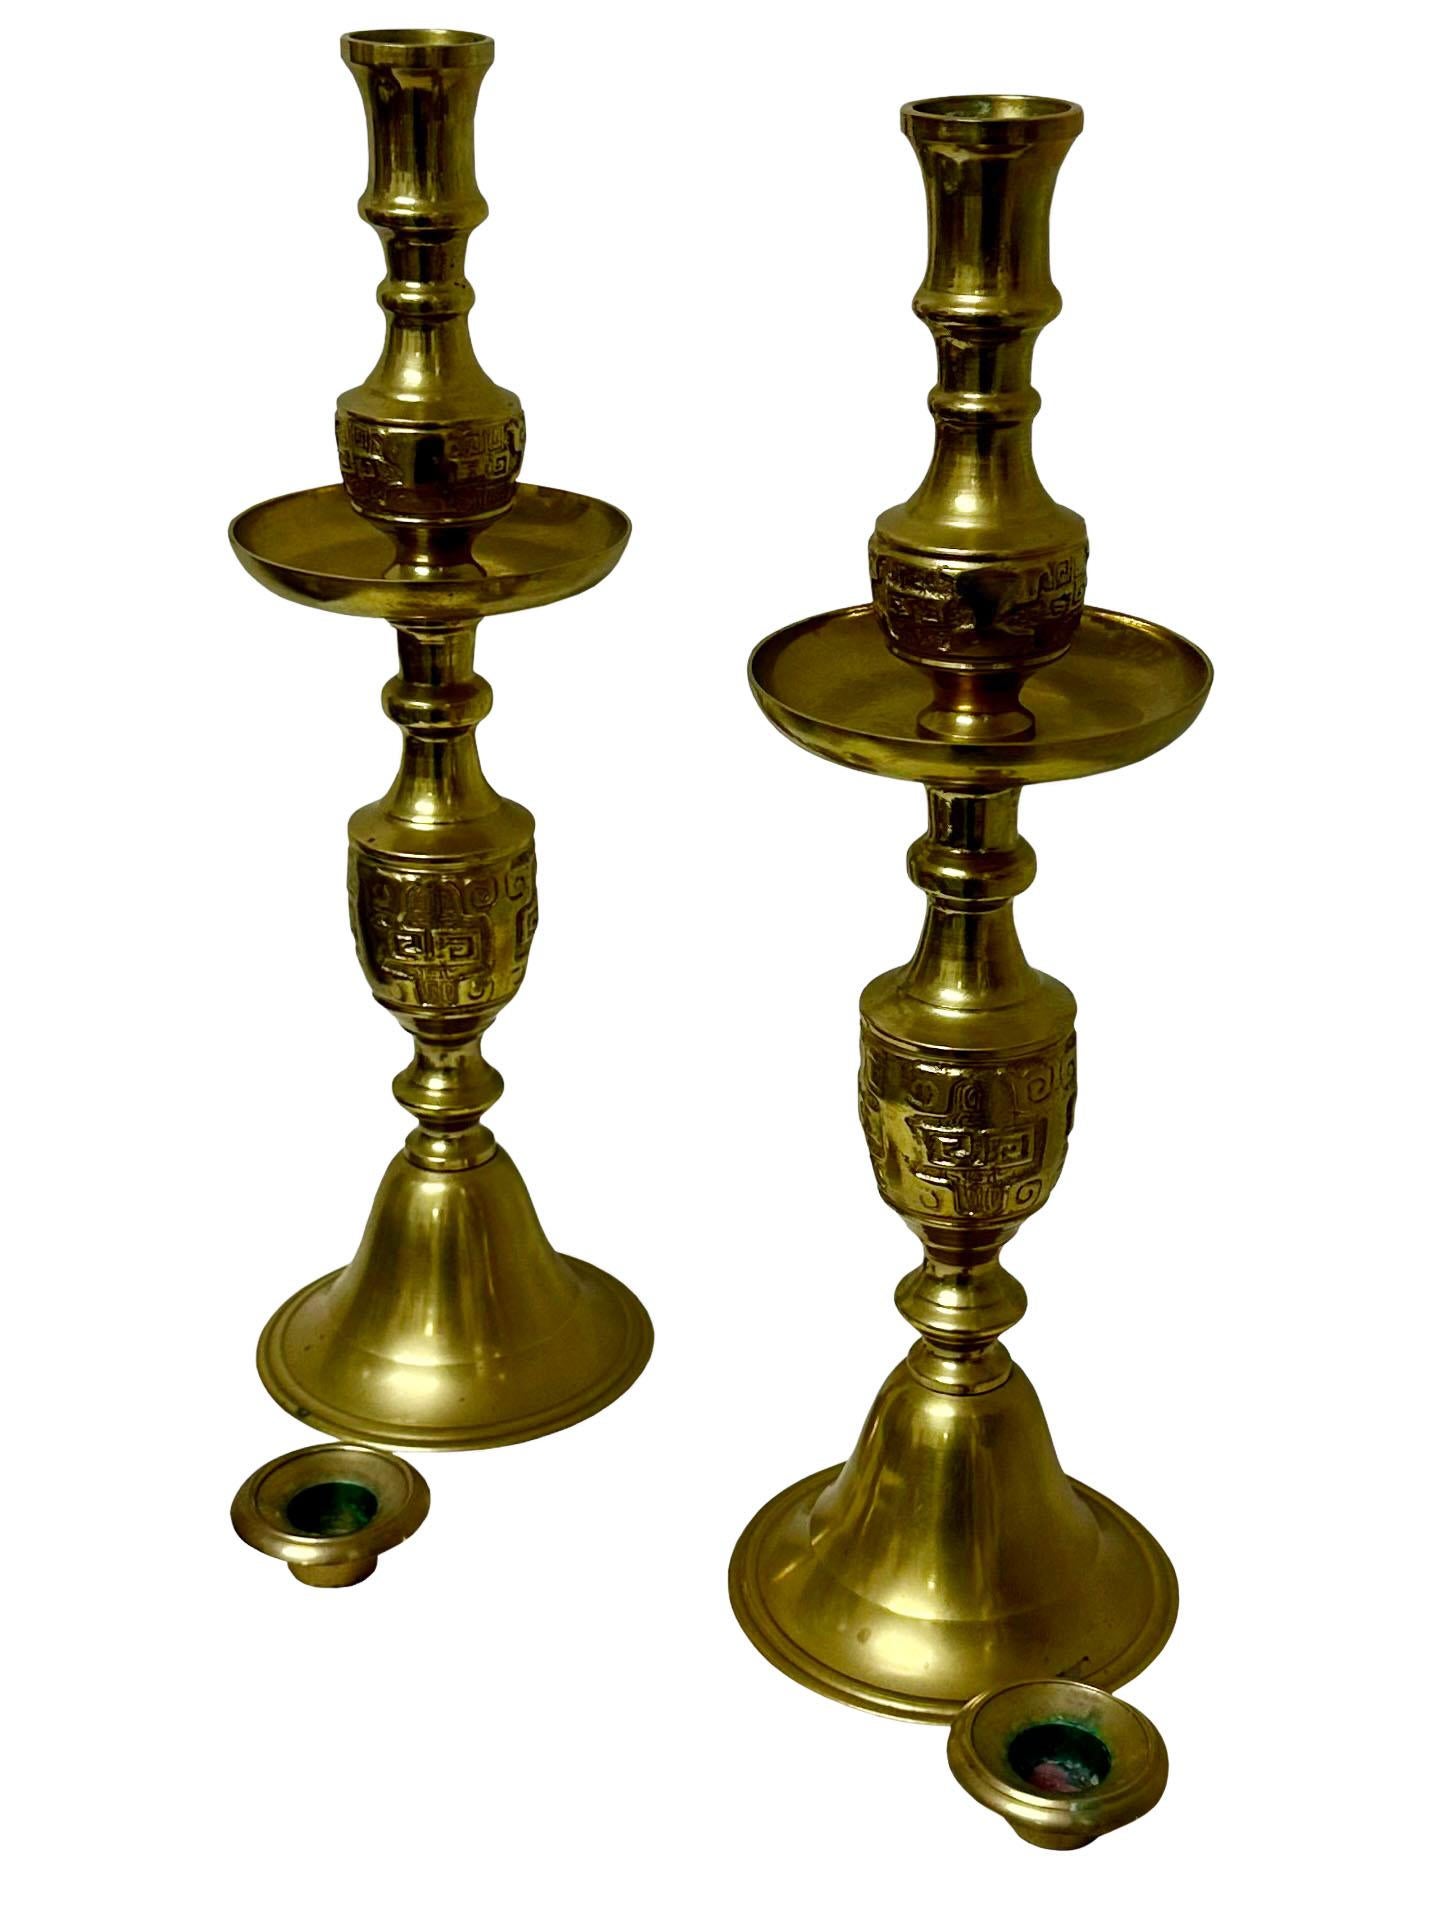 A striking pair of 1950's Hollywood Regency candlesticks are by James Mont in the asian taste. There's a bow sash on each one.